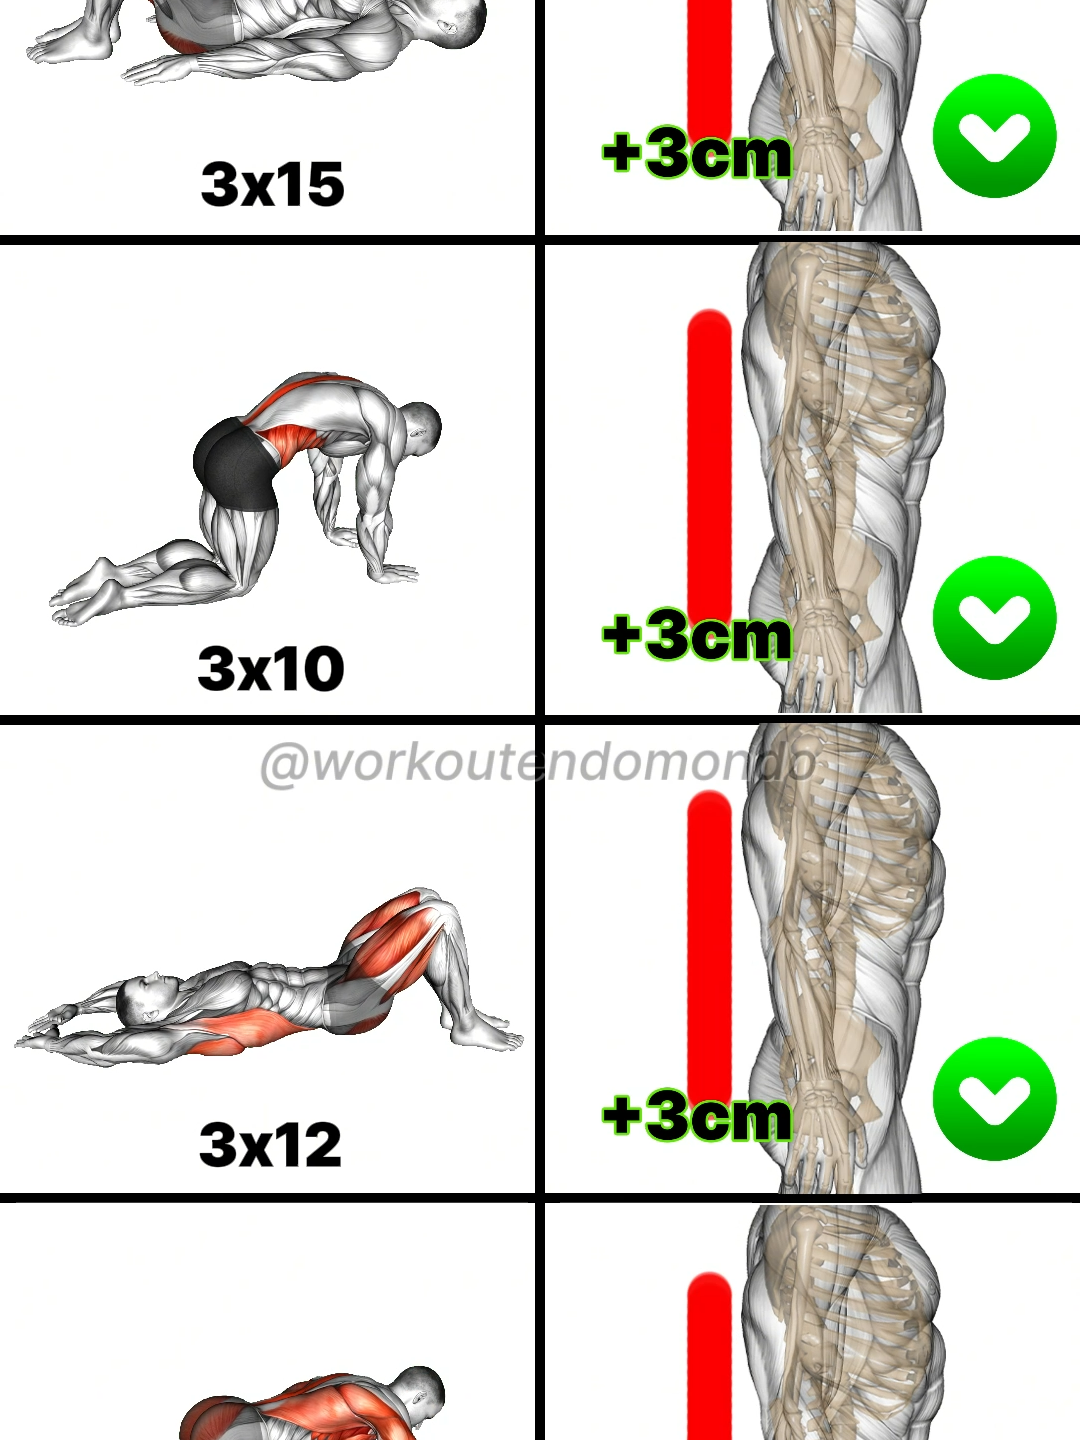 Strengthen your back with these top dumbbell exercises! 💪🔥 From rows to deadlifts, these moves are perfect for building a strong, sculpted back. Suitable for all fitness levels! 🏋️‍♂️ 1️⃣ Pelvic Tilts: 3 sets x 15 reps 2️⃣ Cat-Cow Stretch: 3 sets x 10 reps 3️⃣ Glute Bridges: 3 sets x 12 reps 4️⃣ Bird Dogs: 3 sets x 10 reps per side #BackWorkout #FitnessGoals #MuscleBuilding #GymTok #GetFit #Endomondo